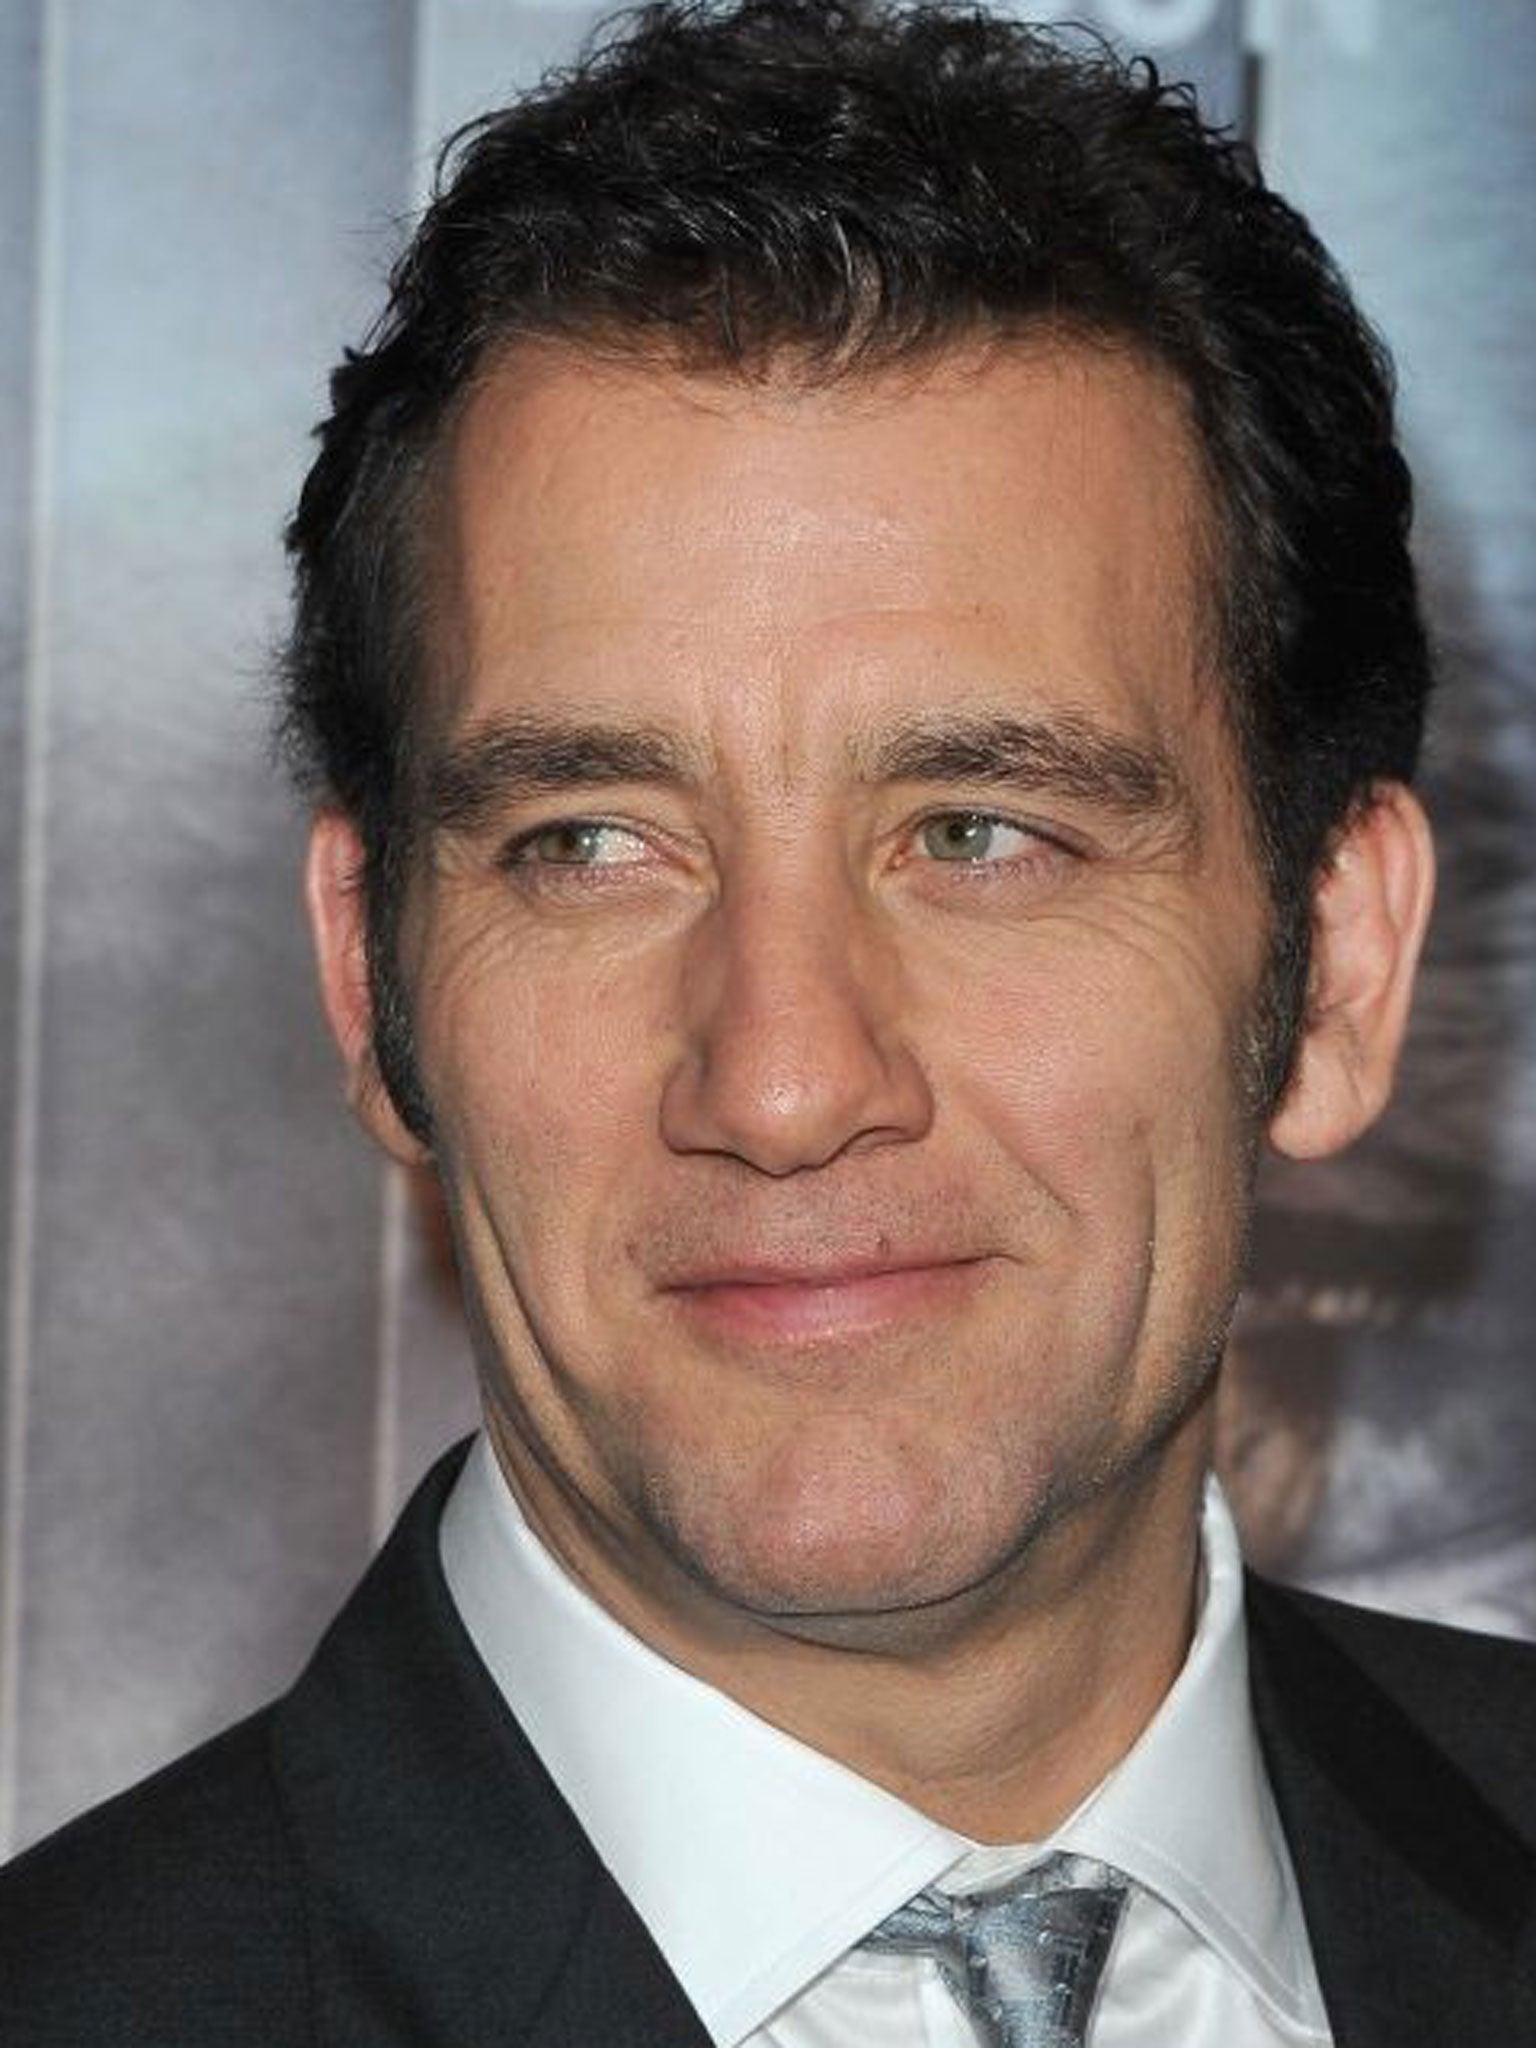 Clive Owen (pictured) and Jacki Weaver are starring in a film about a philanderer who is blackmailed by a teenager